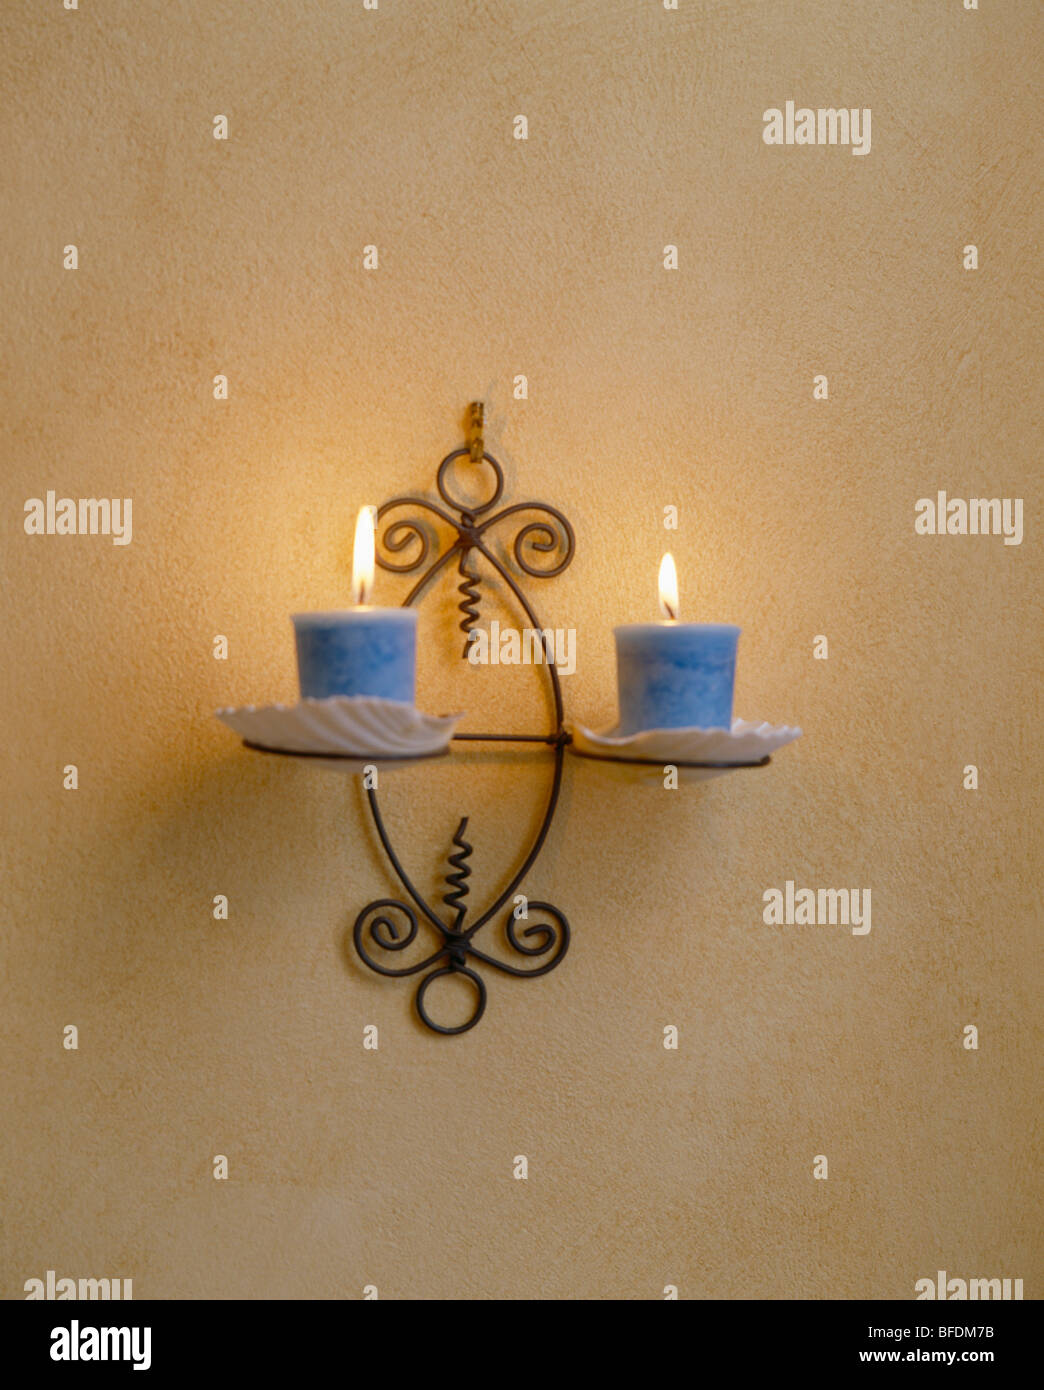 Close-up of blue candles on metal wall-sconce Stock Photo